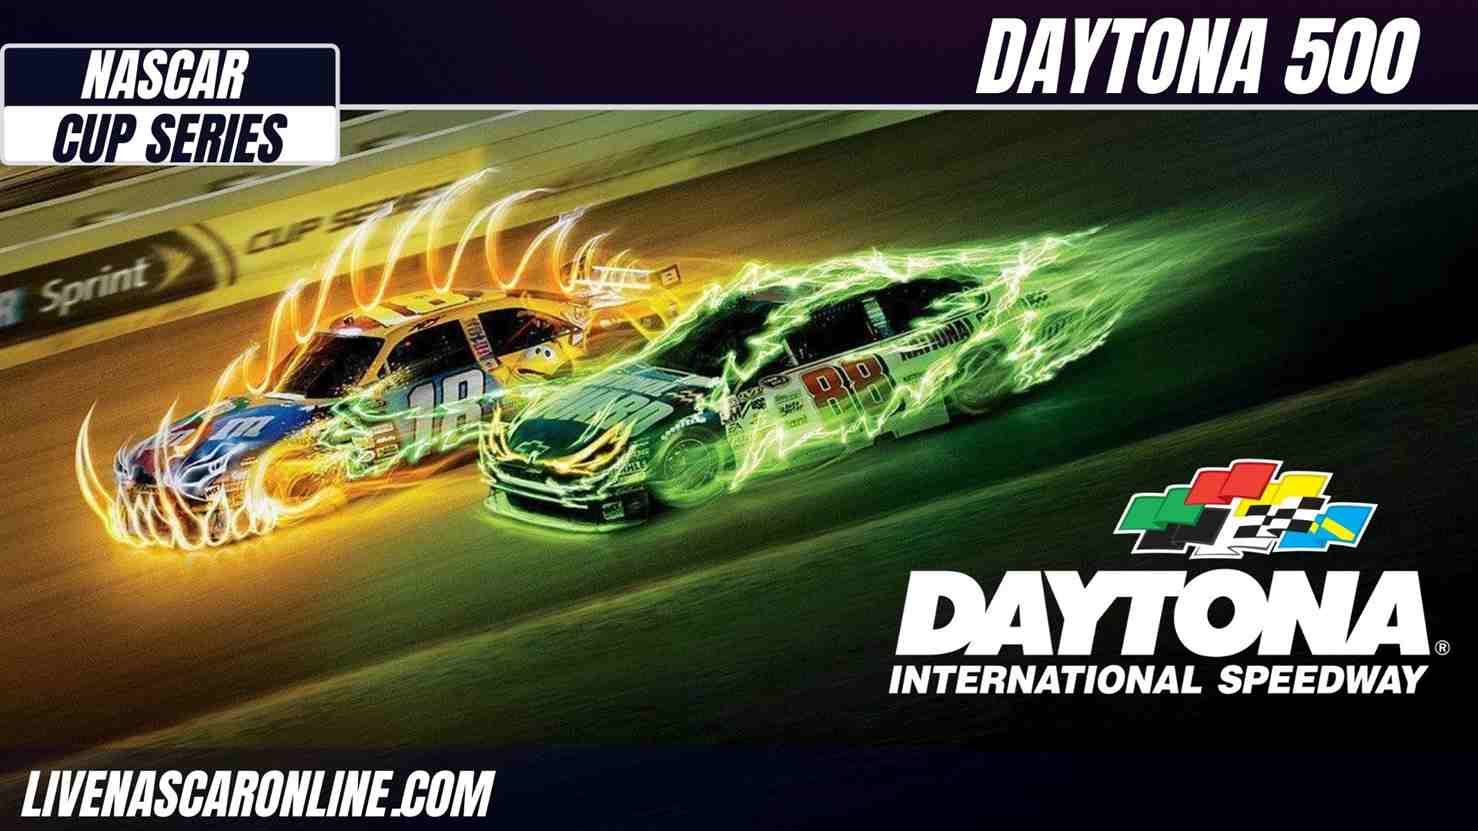 How to watch Daytona 500 NASCAR Cup Live Stream 2021 - Full Race Replay